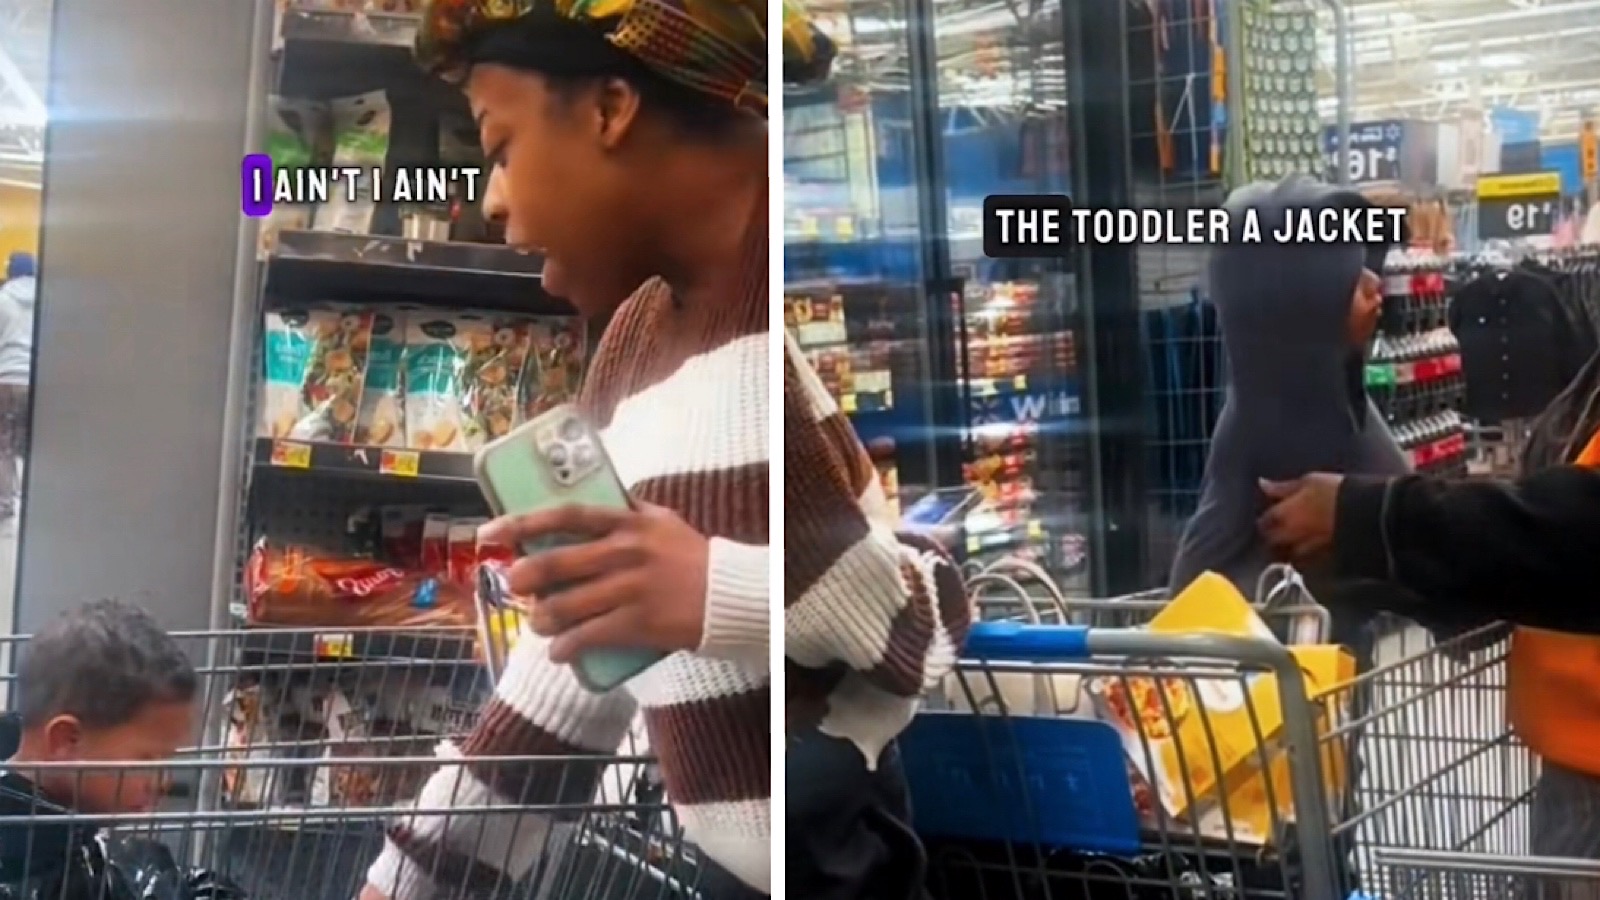 Woman goes viral after finding explicit Easter egg on kid's shirt at Walmart  - Dexerto